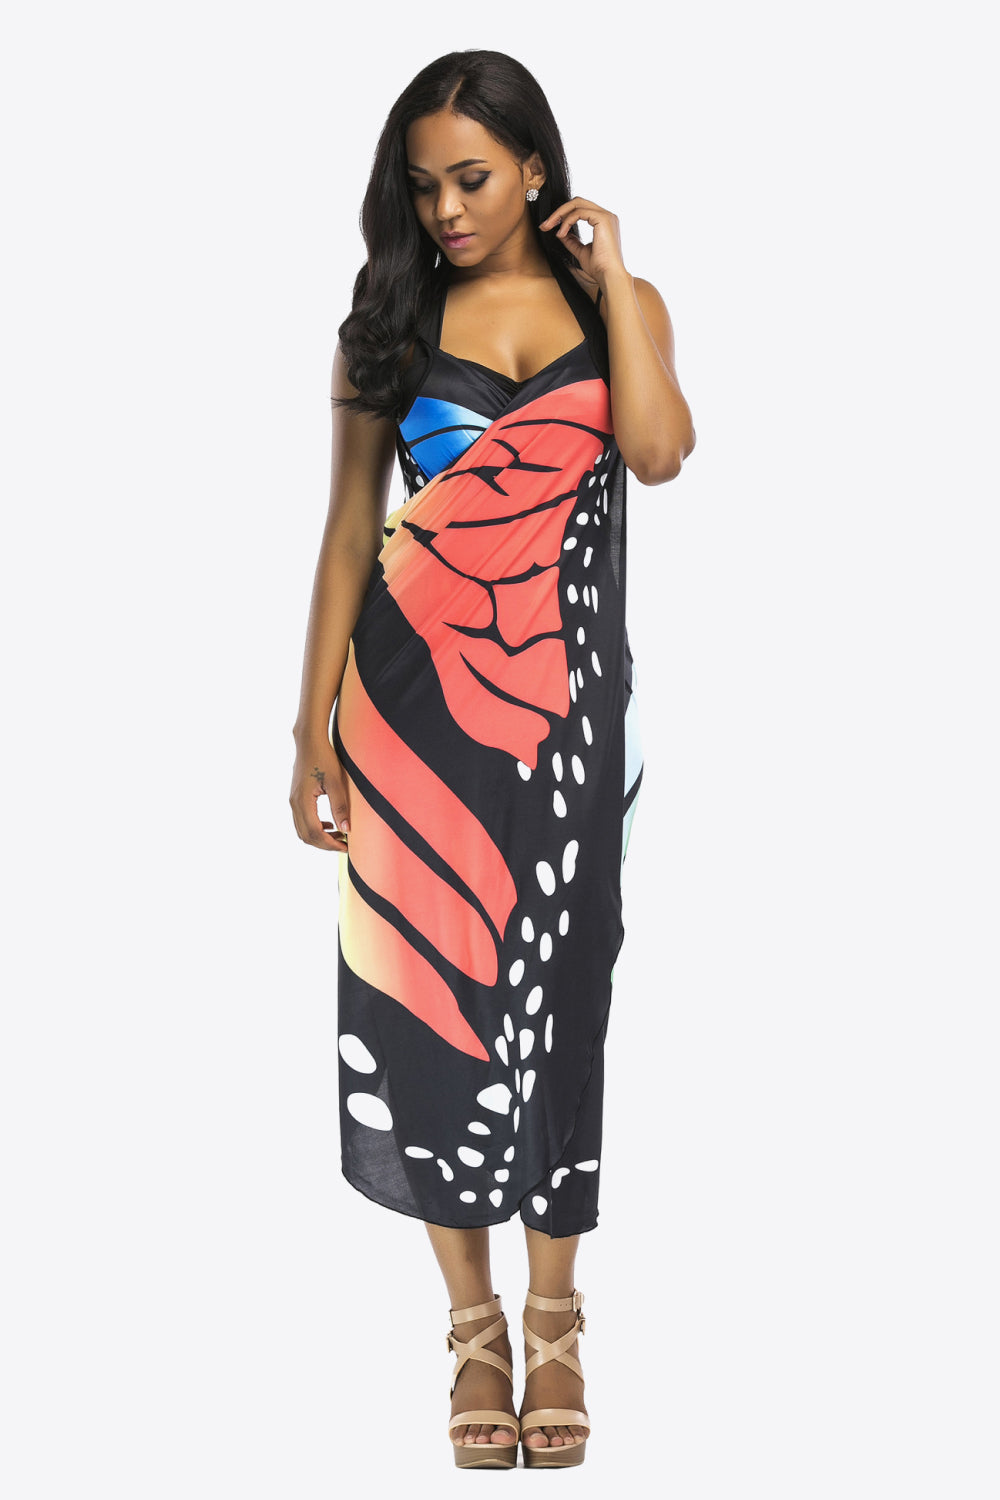 BUTTERFLY cover-up dress - Lamoille Yoga